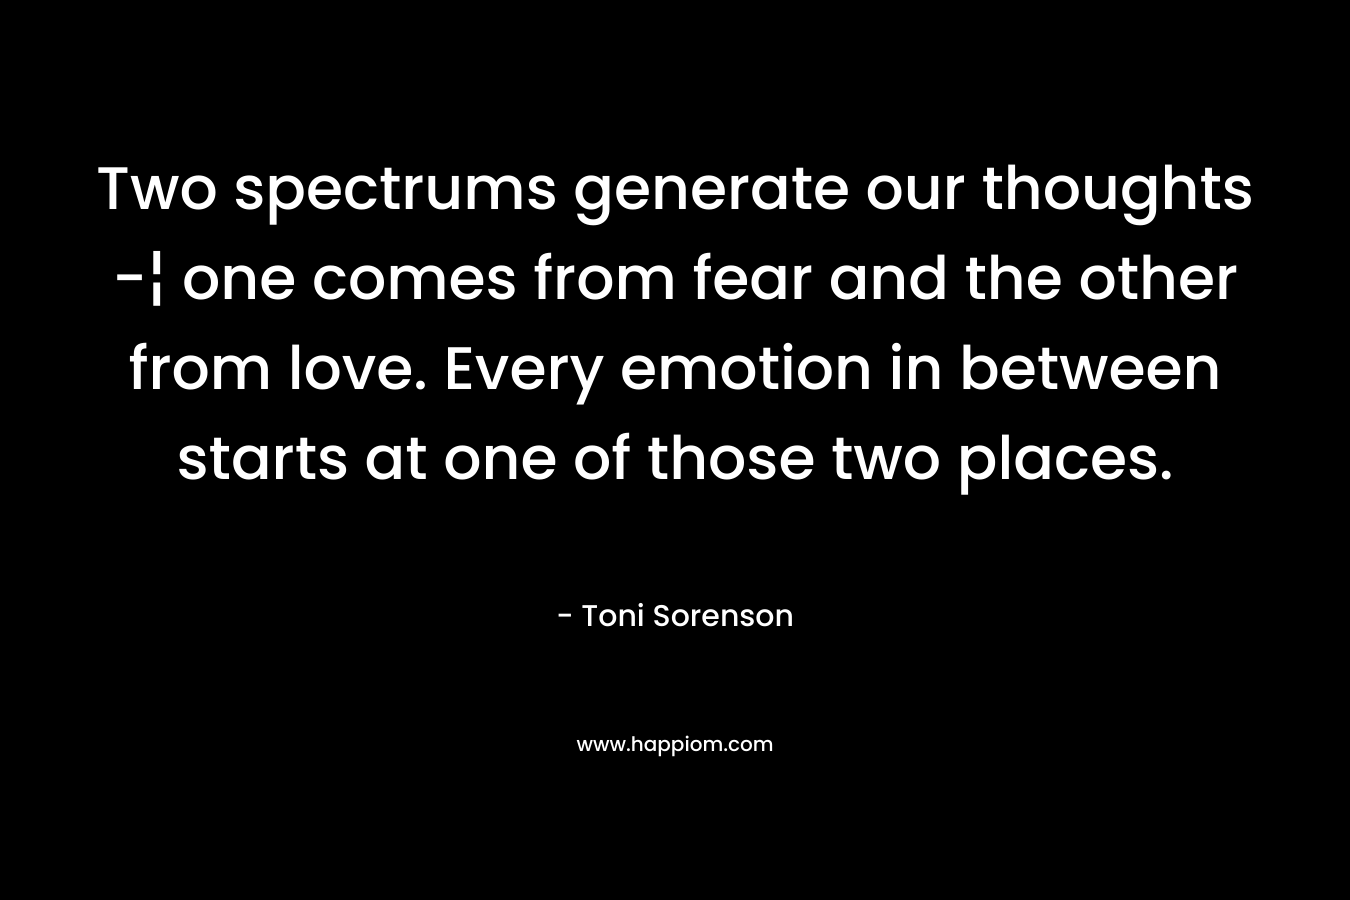 Two spectrums generate our thoughts -¦ one comes from fear and the other from love. Every emotion in between starts at one of those two places.